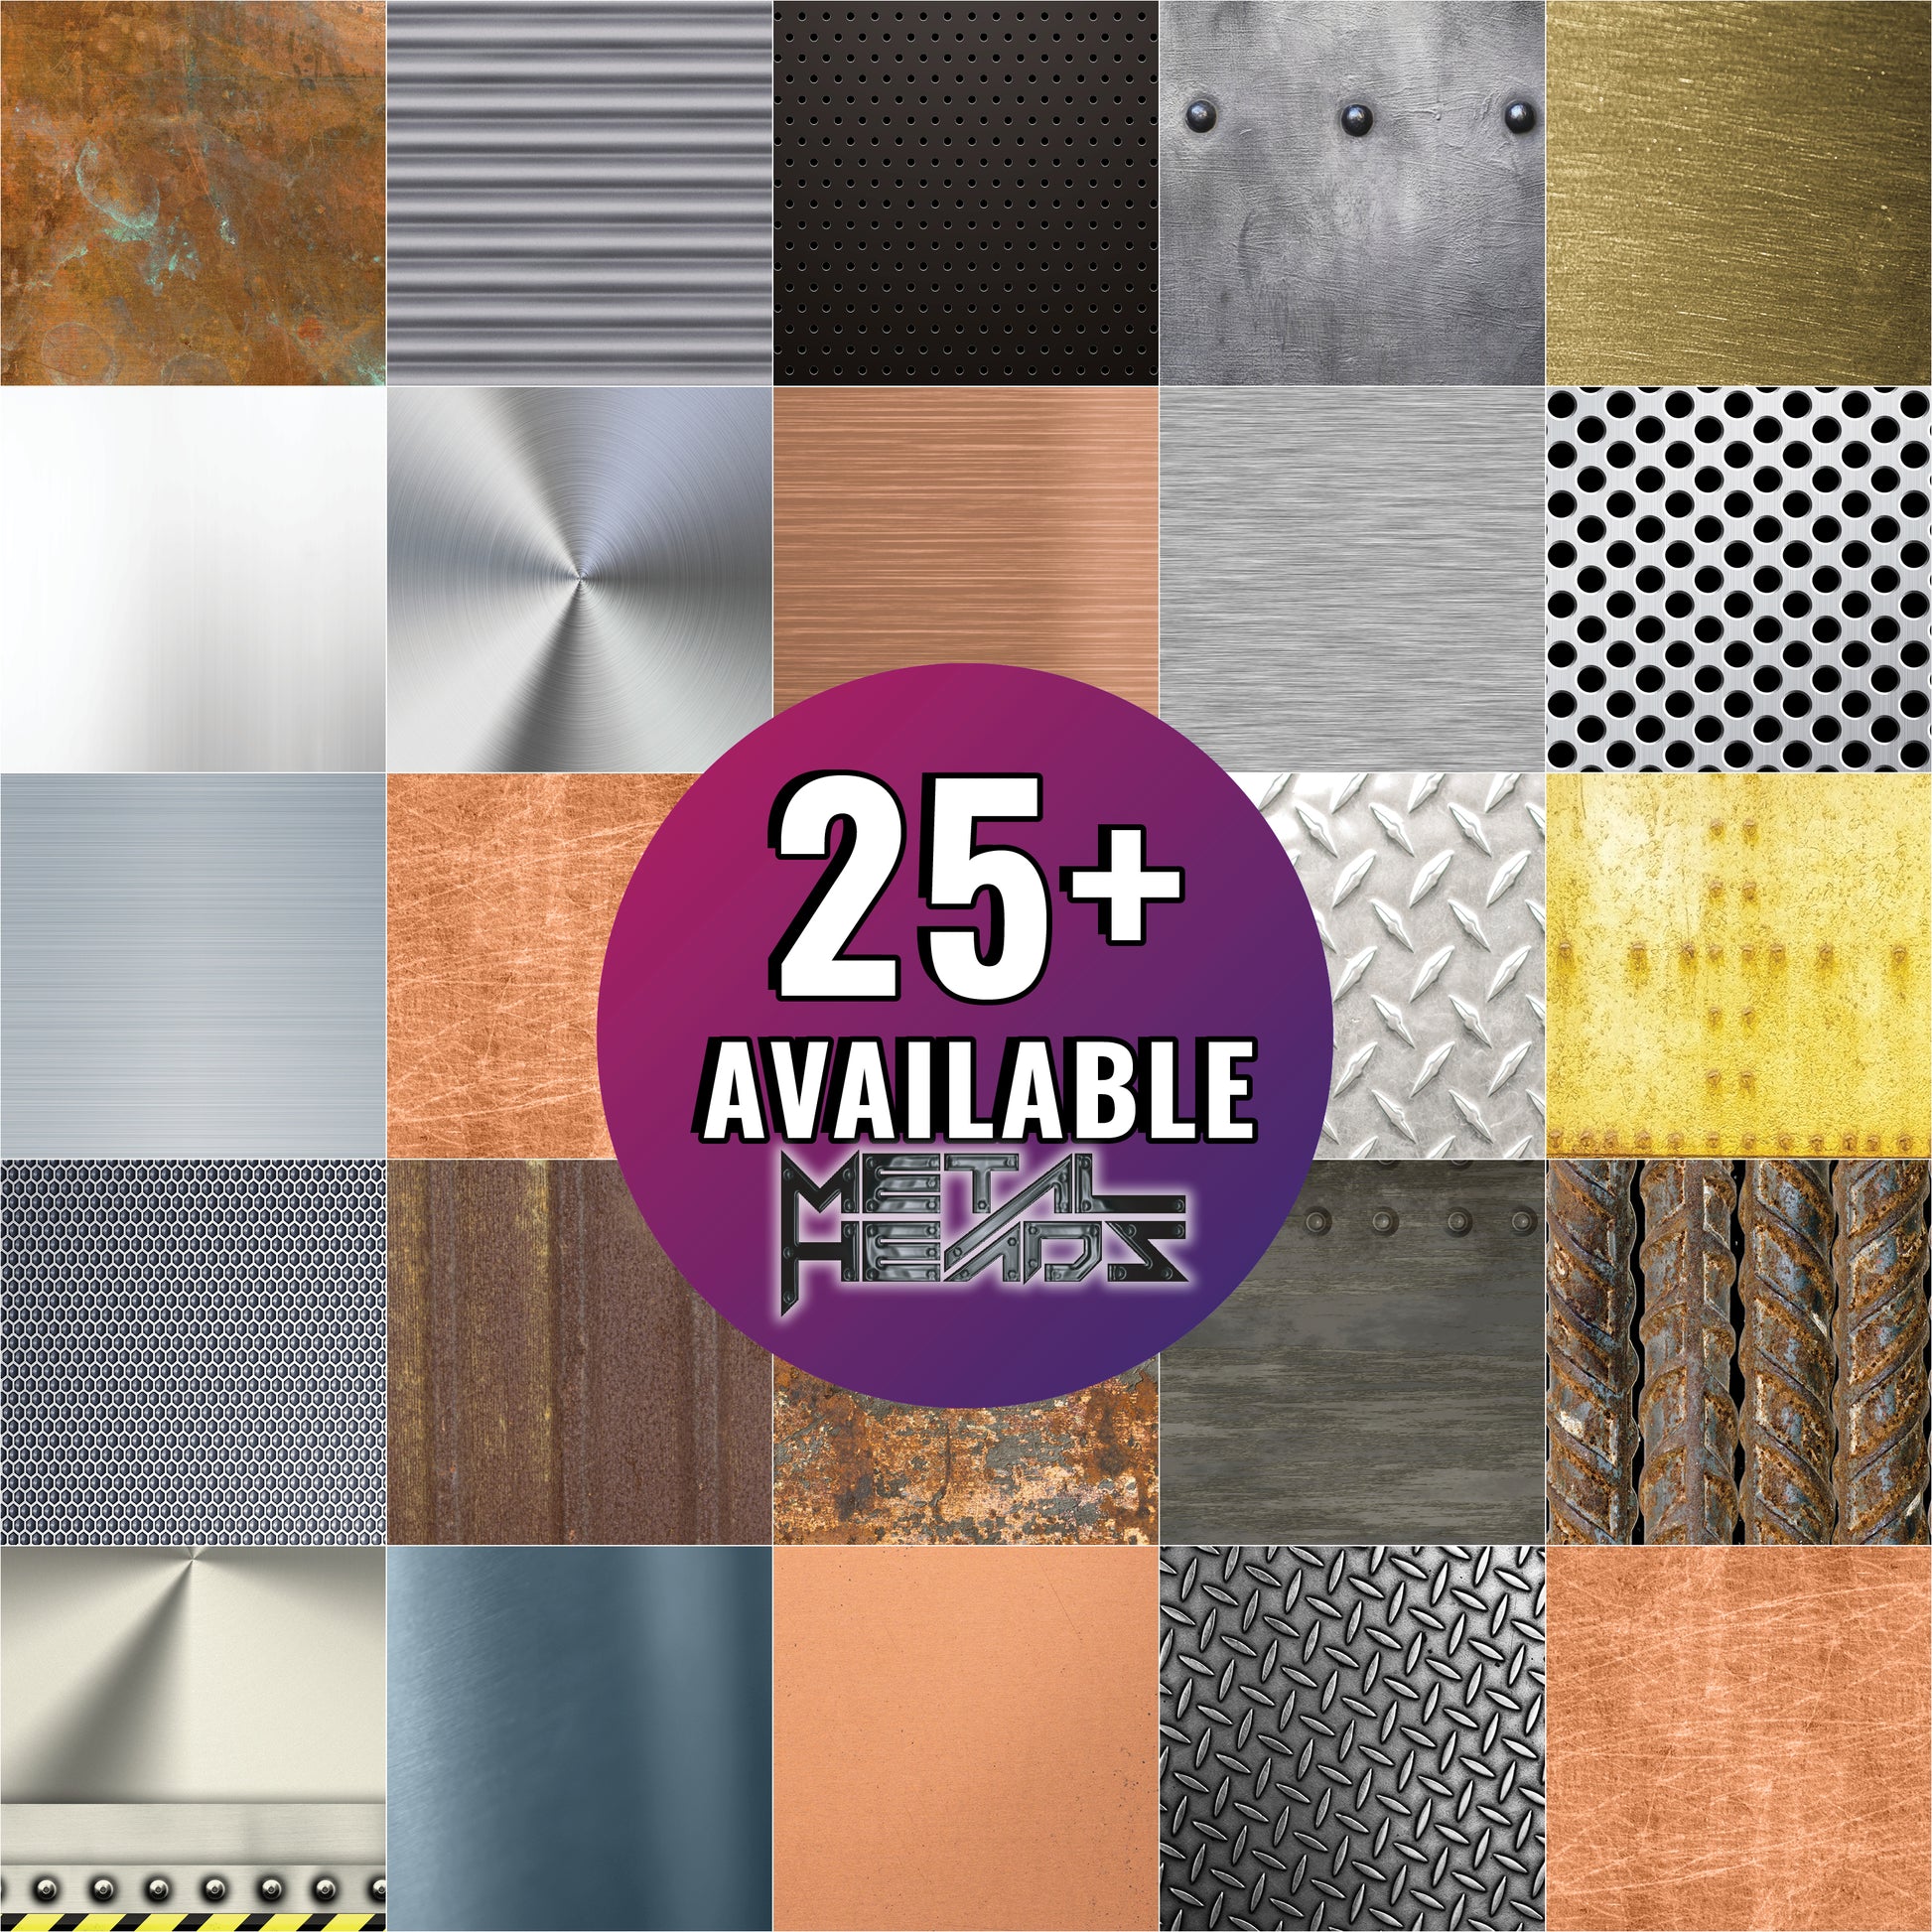 25+ Types of Metal Head Wraps Available. Get yours today!